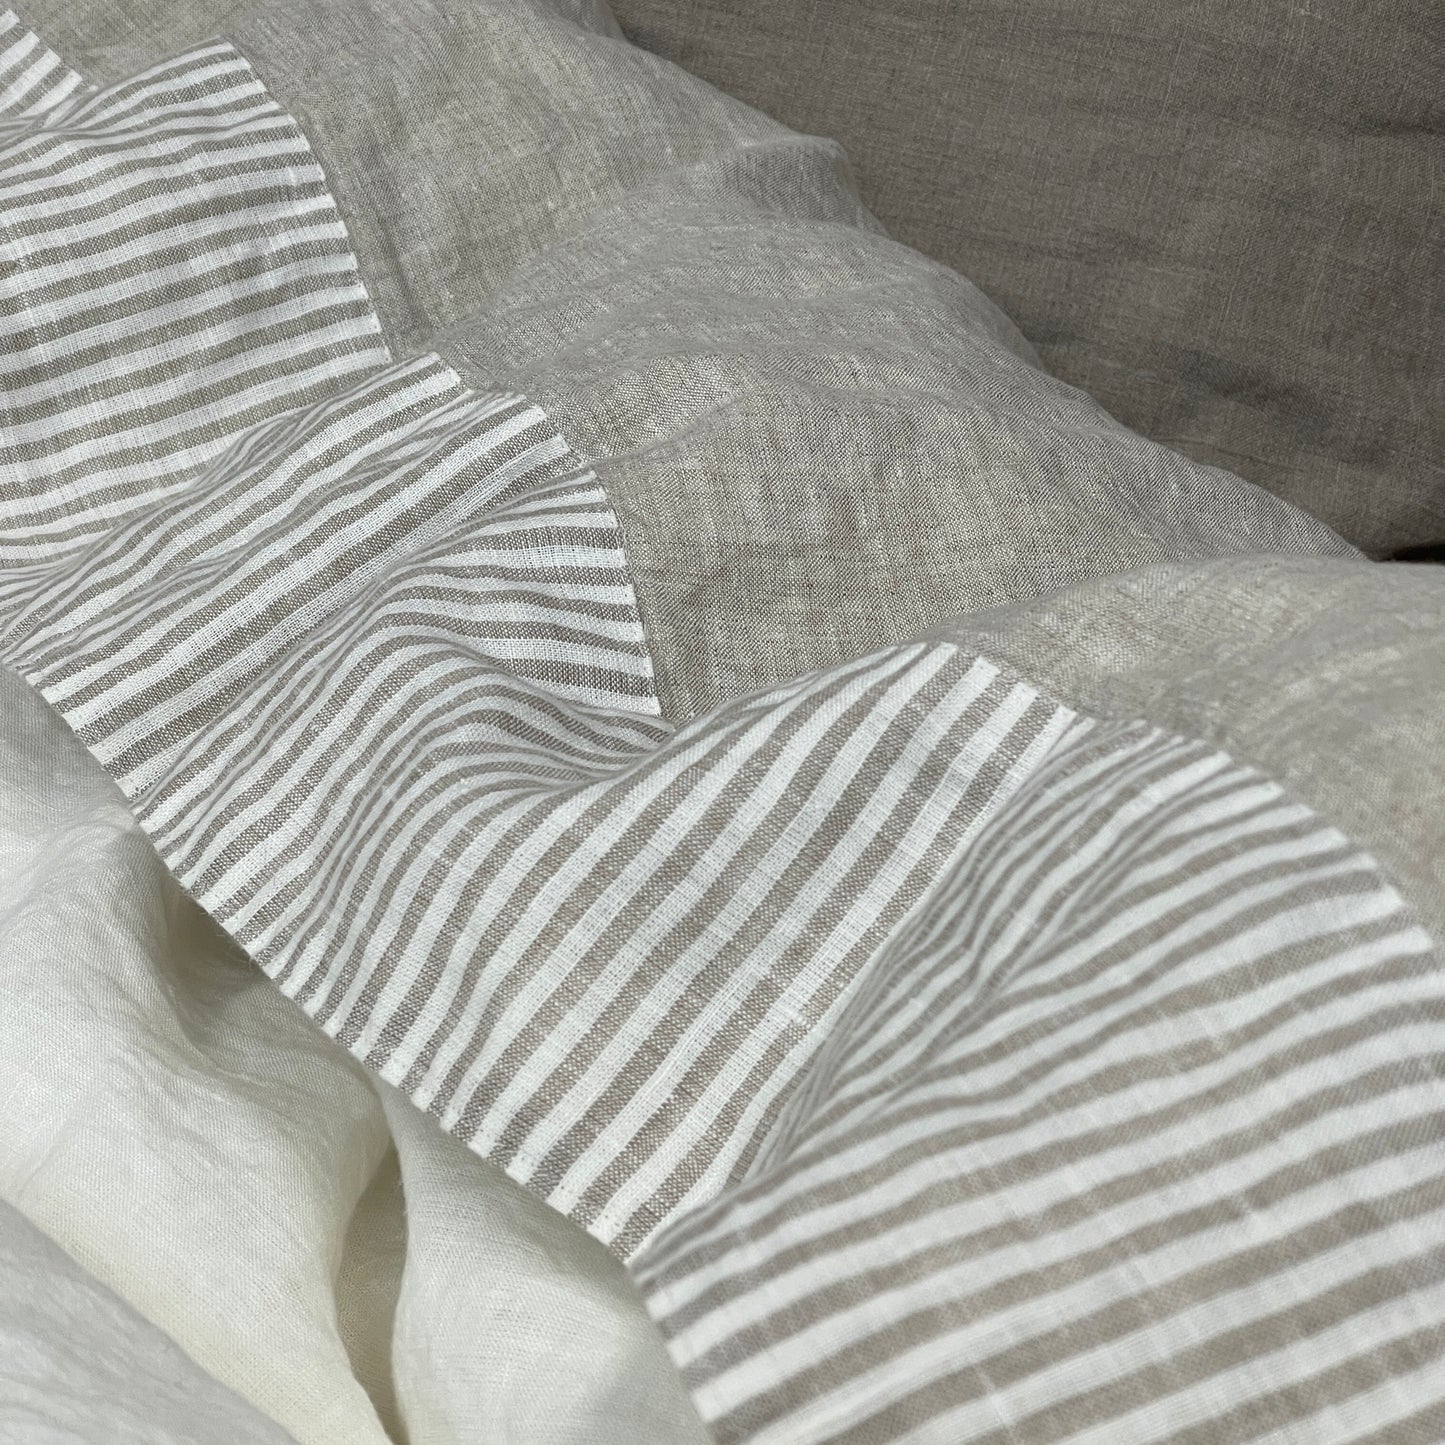 Stripe Accent Greige Flat Sheet with decorative detail